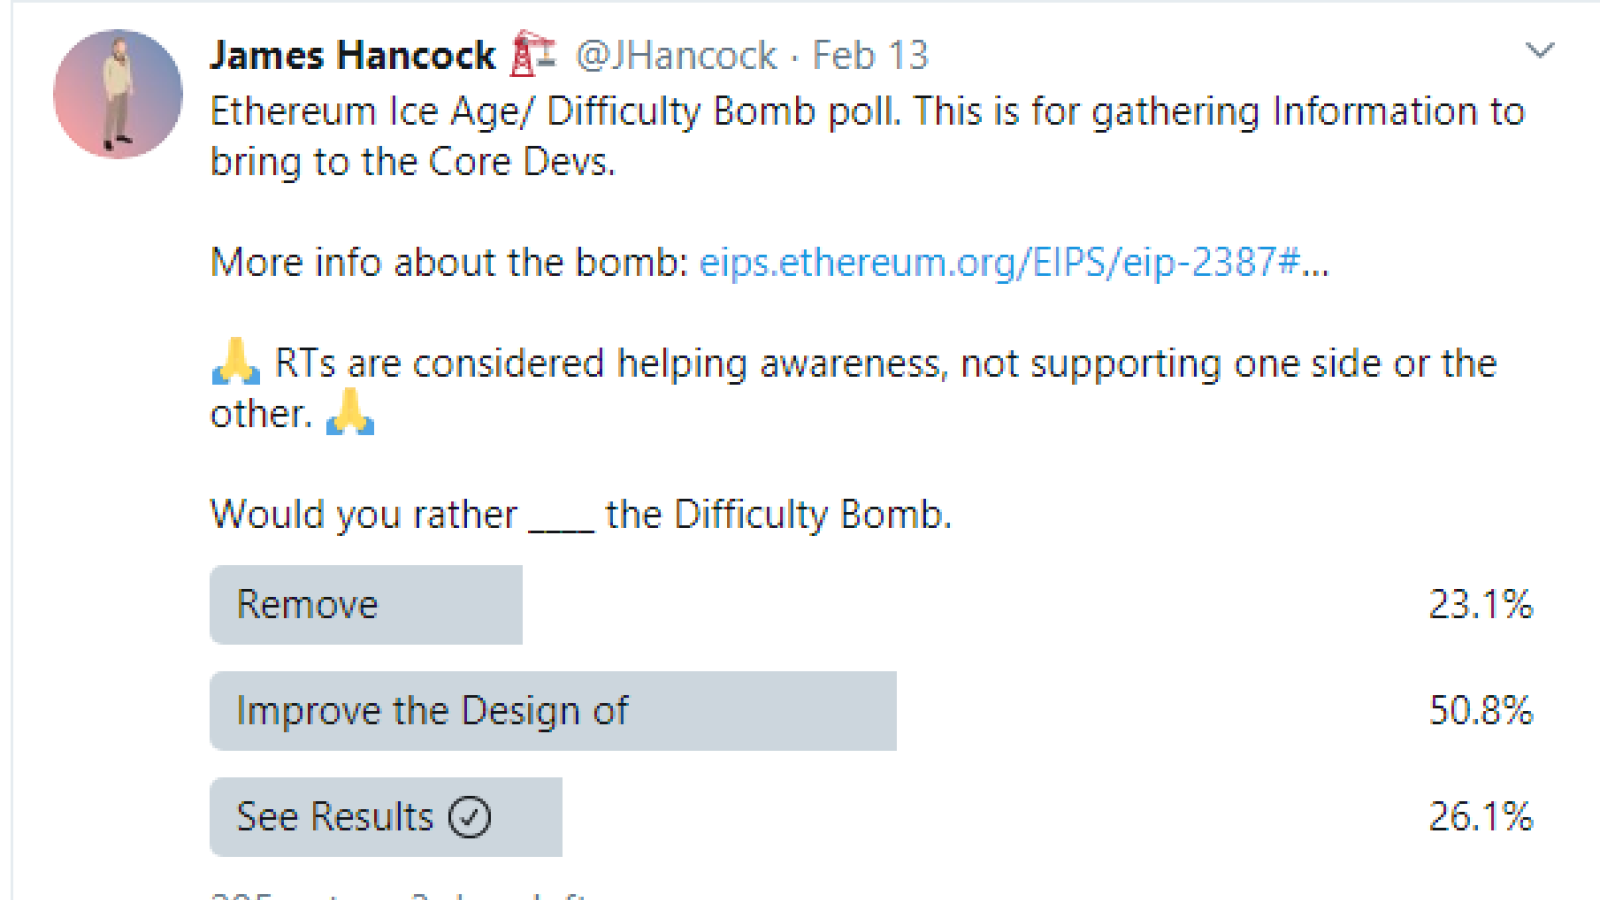 A concept to erase difficulty bomb is proposed